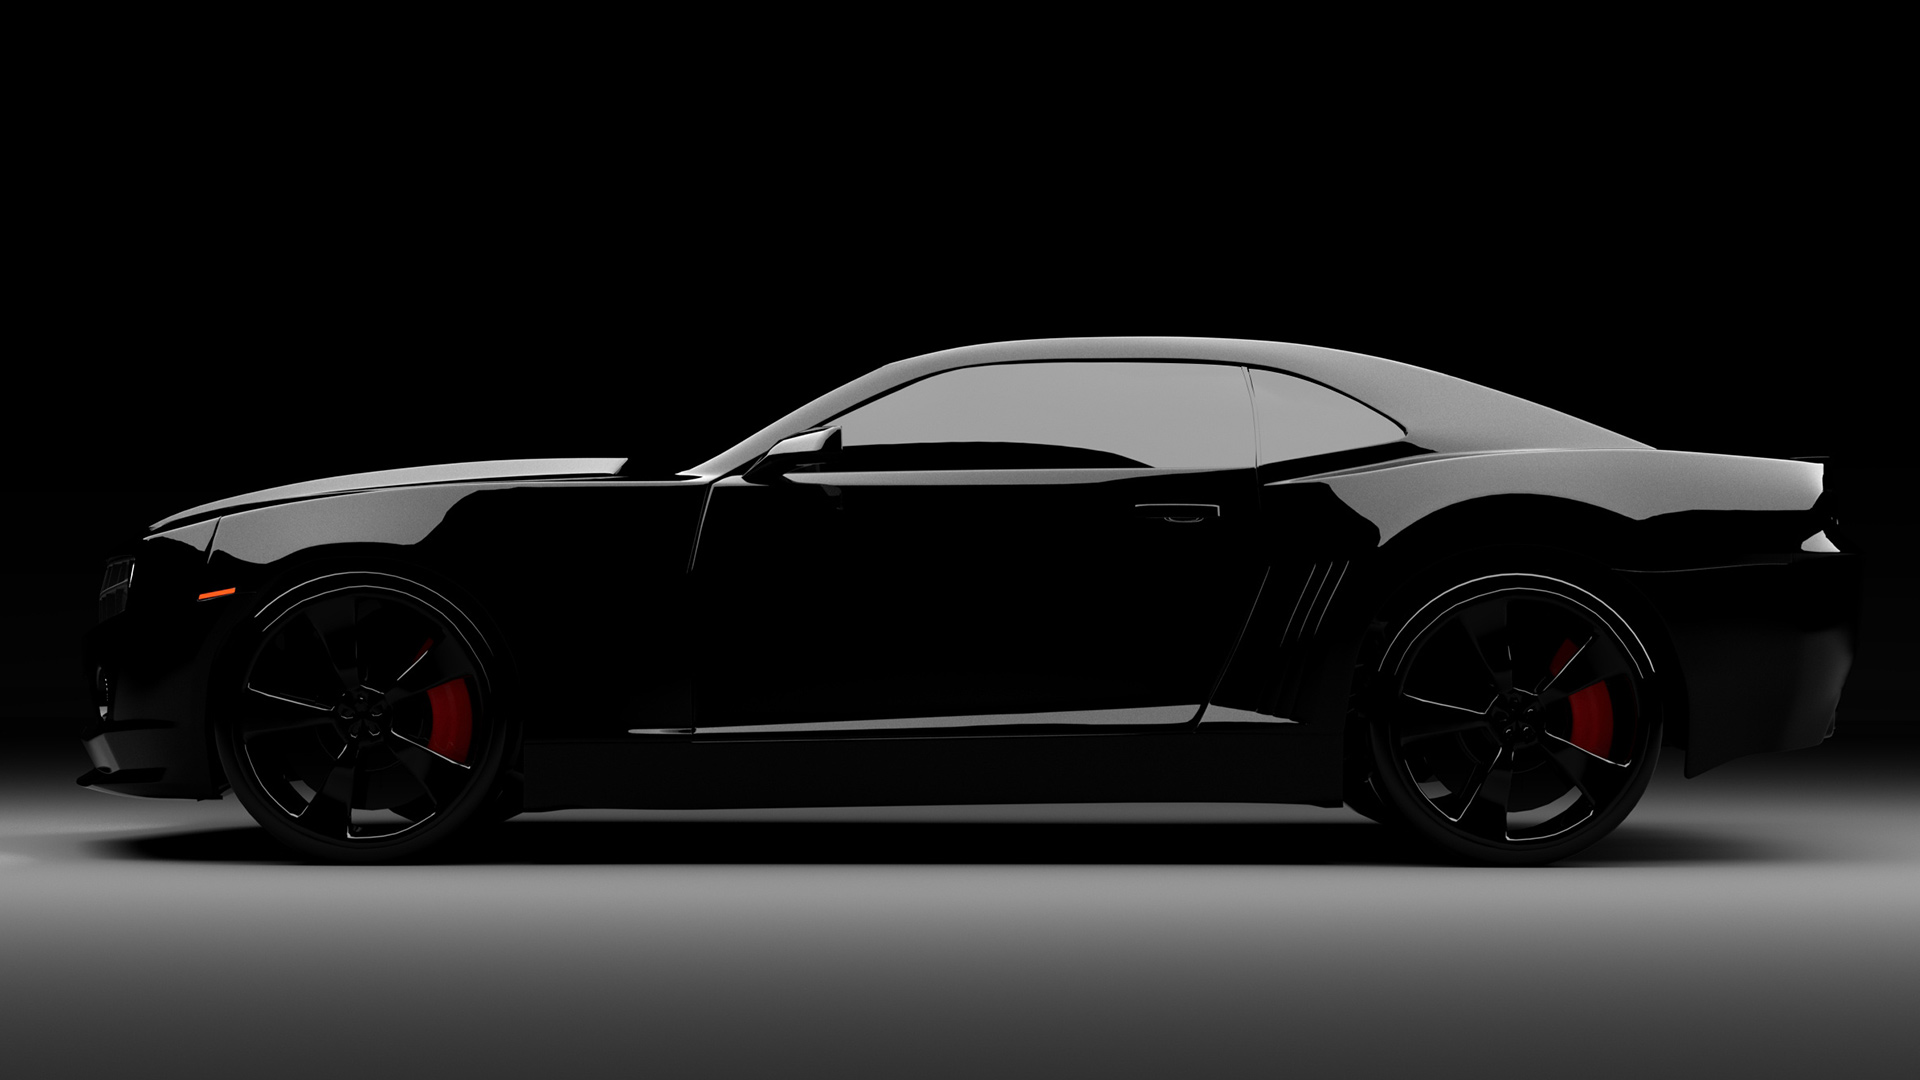 Black Car Android Stock Wallpapers | HD Wallpapers | ID #20789